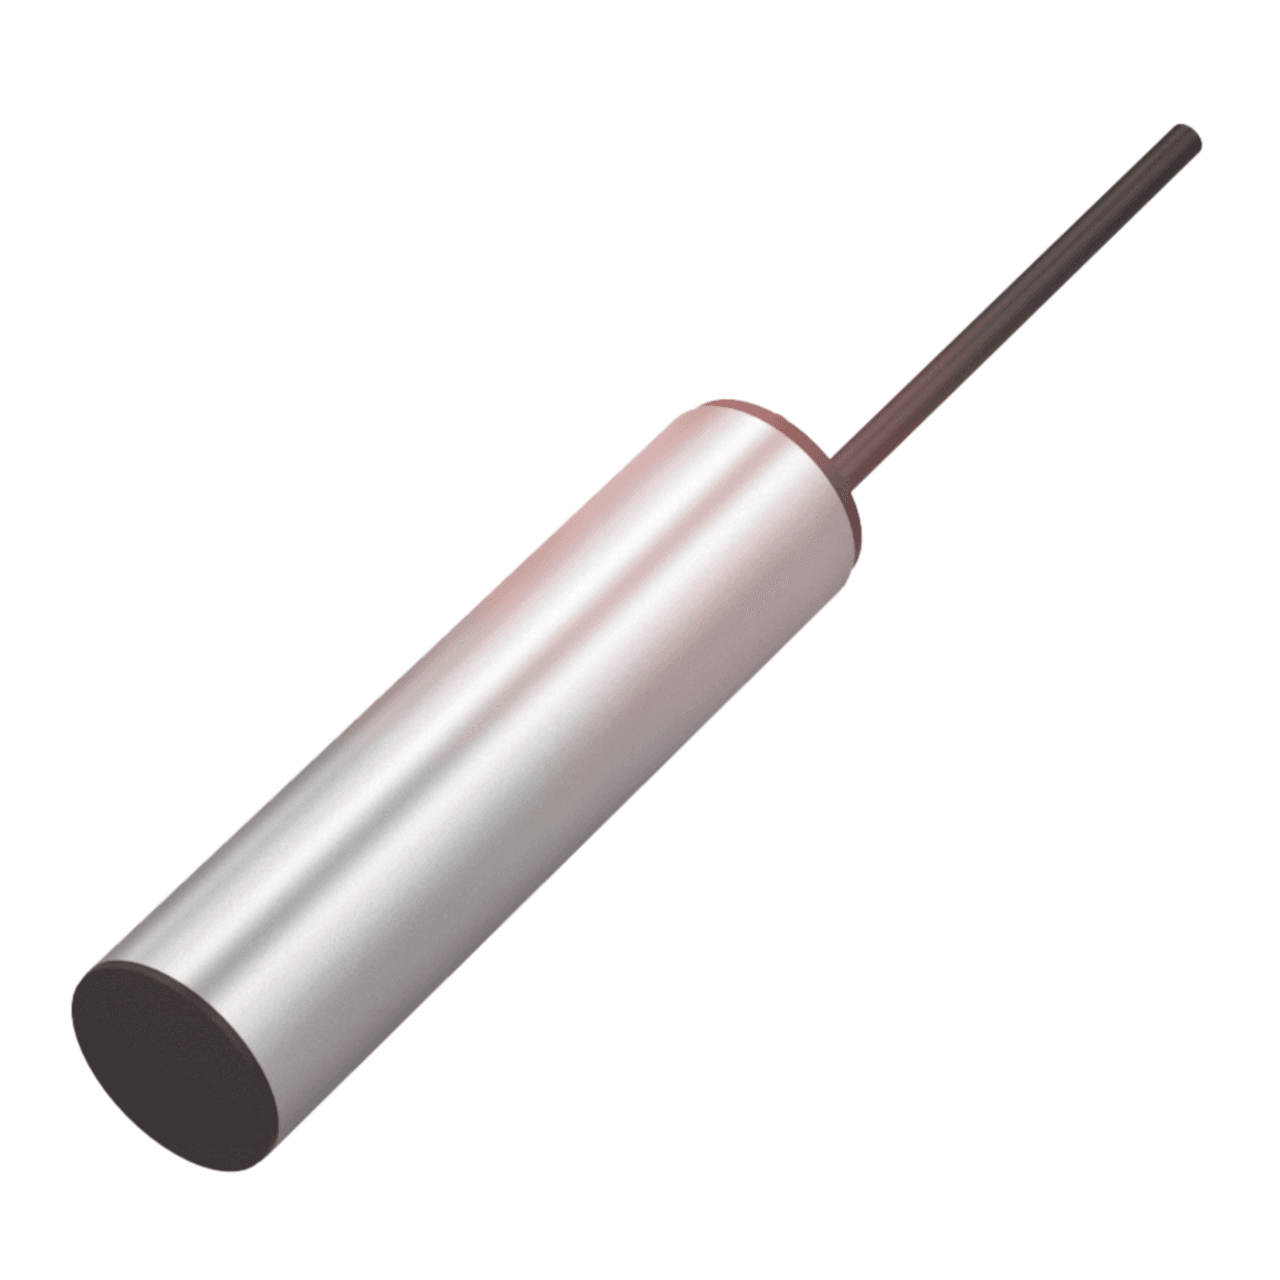 Balluff BCS00W7 Capacitive sensors with special propertie, Dimension: Ø 20 x 81 mm, Series: G20, Installation: for flush mounting, Connection: Cable, 3.00 m, PVC, Switching output: PNP NO/NC, Switching frequency: 100 Hz, Range: 1.5...10 mm